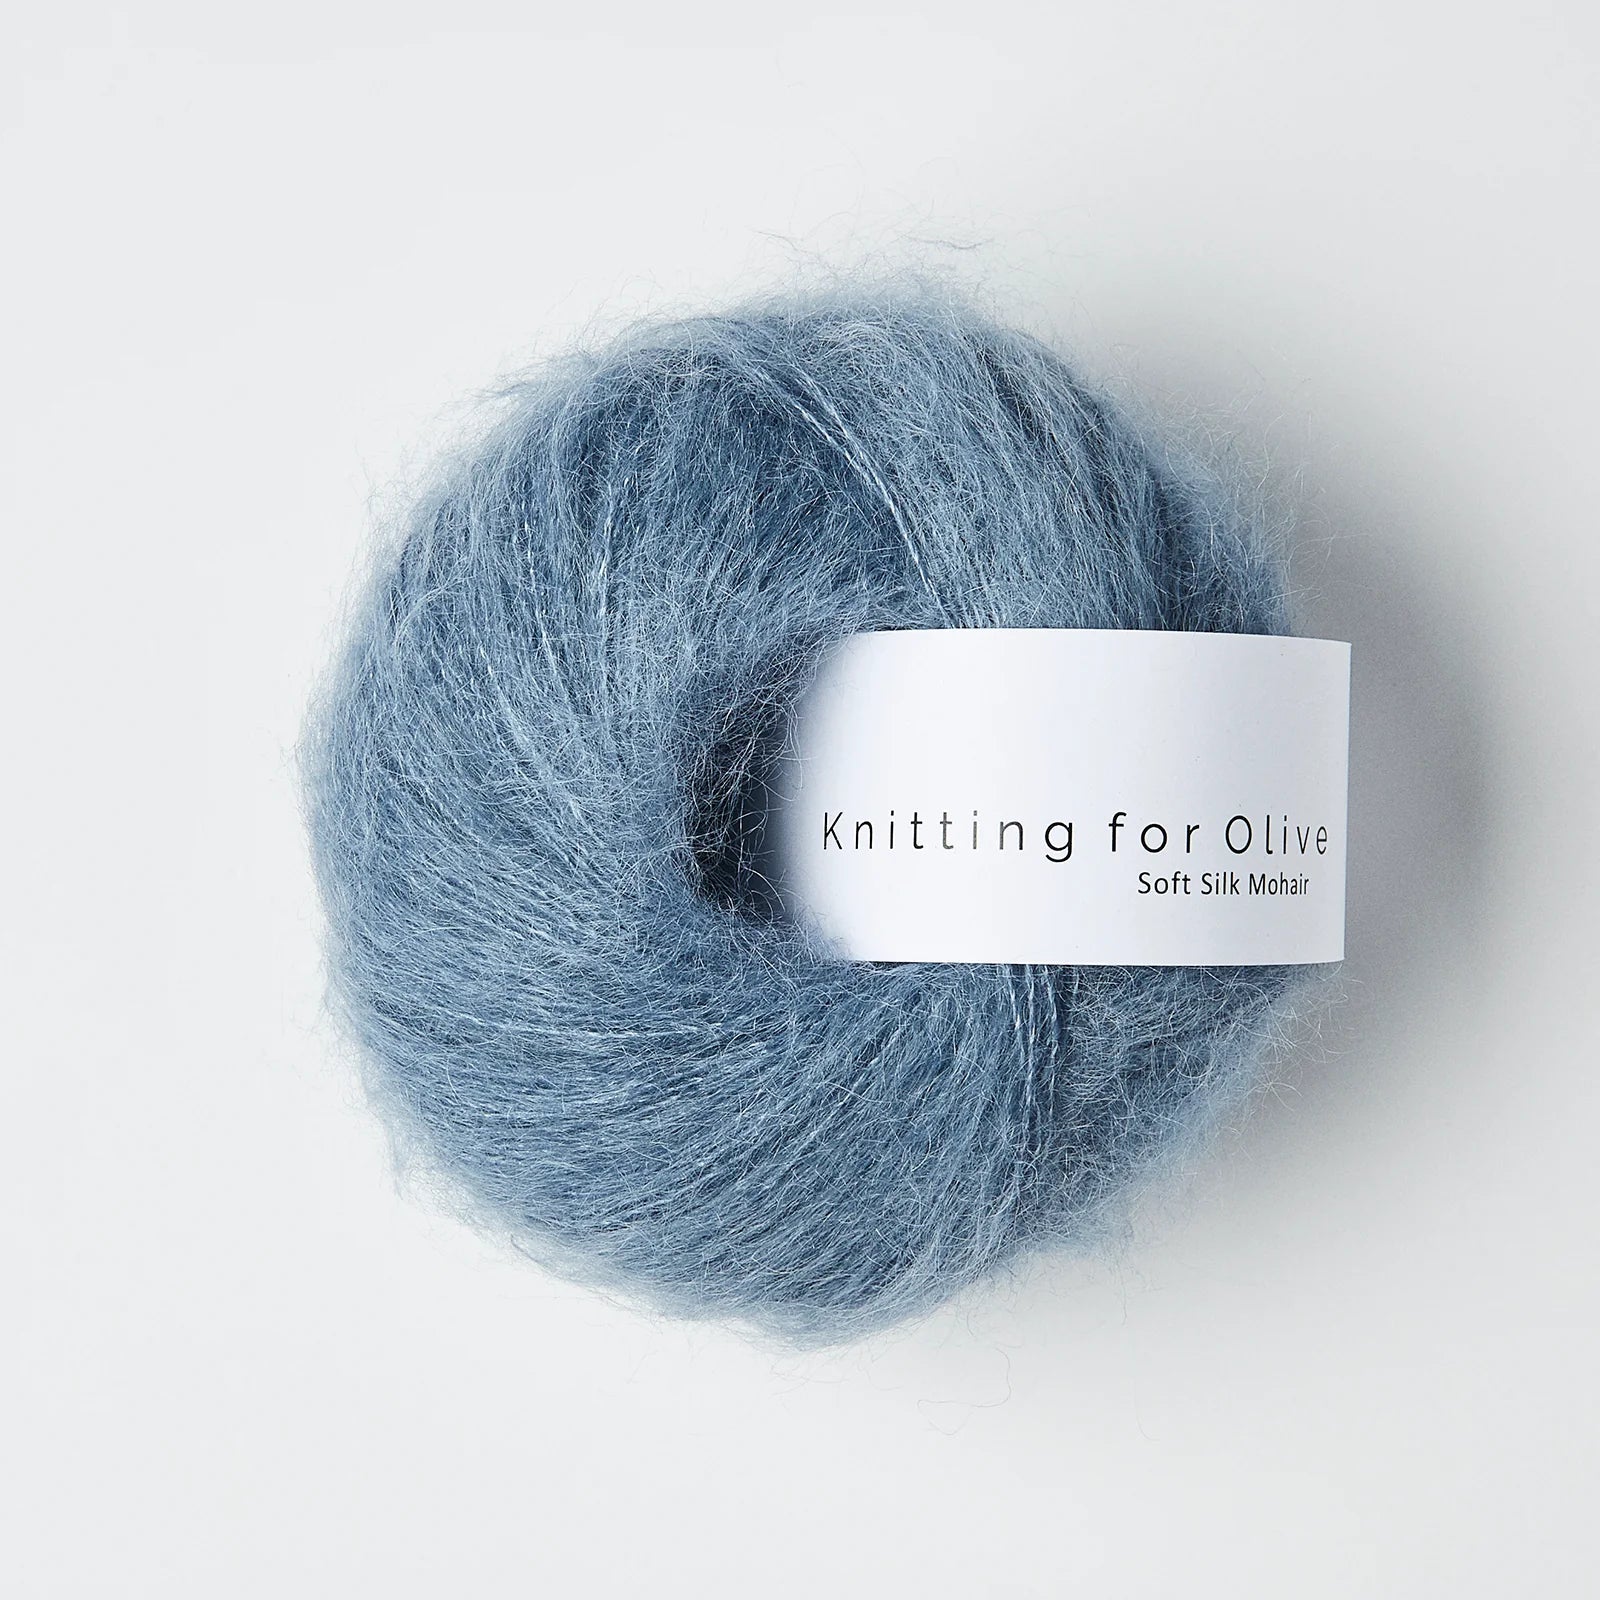 Knitting for Olive Soft Silk Mohair - Knitting for Olive - Dusty Dove Blue - The Little Yarn Store